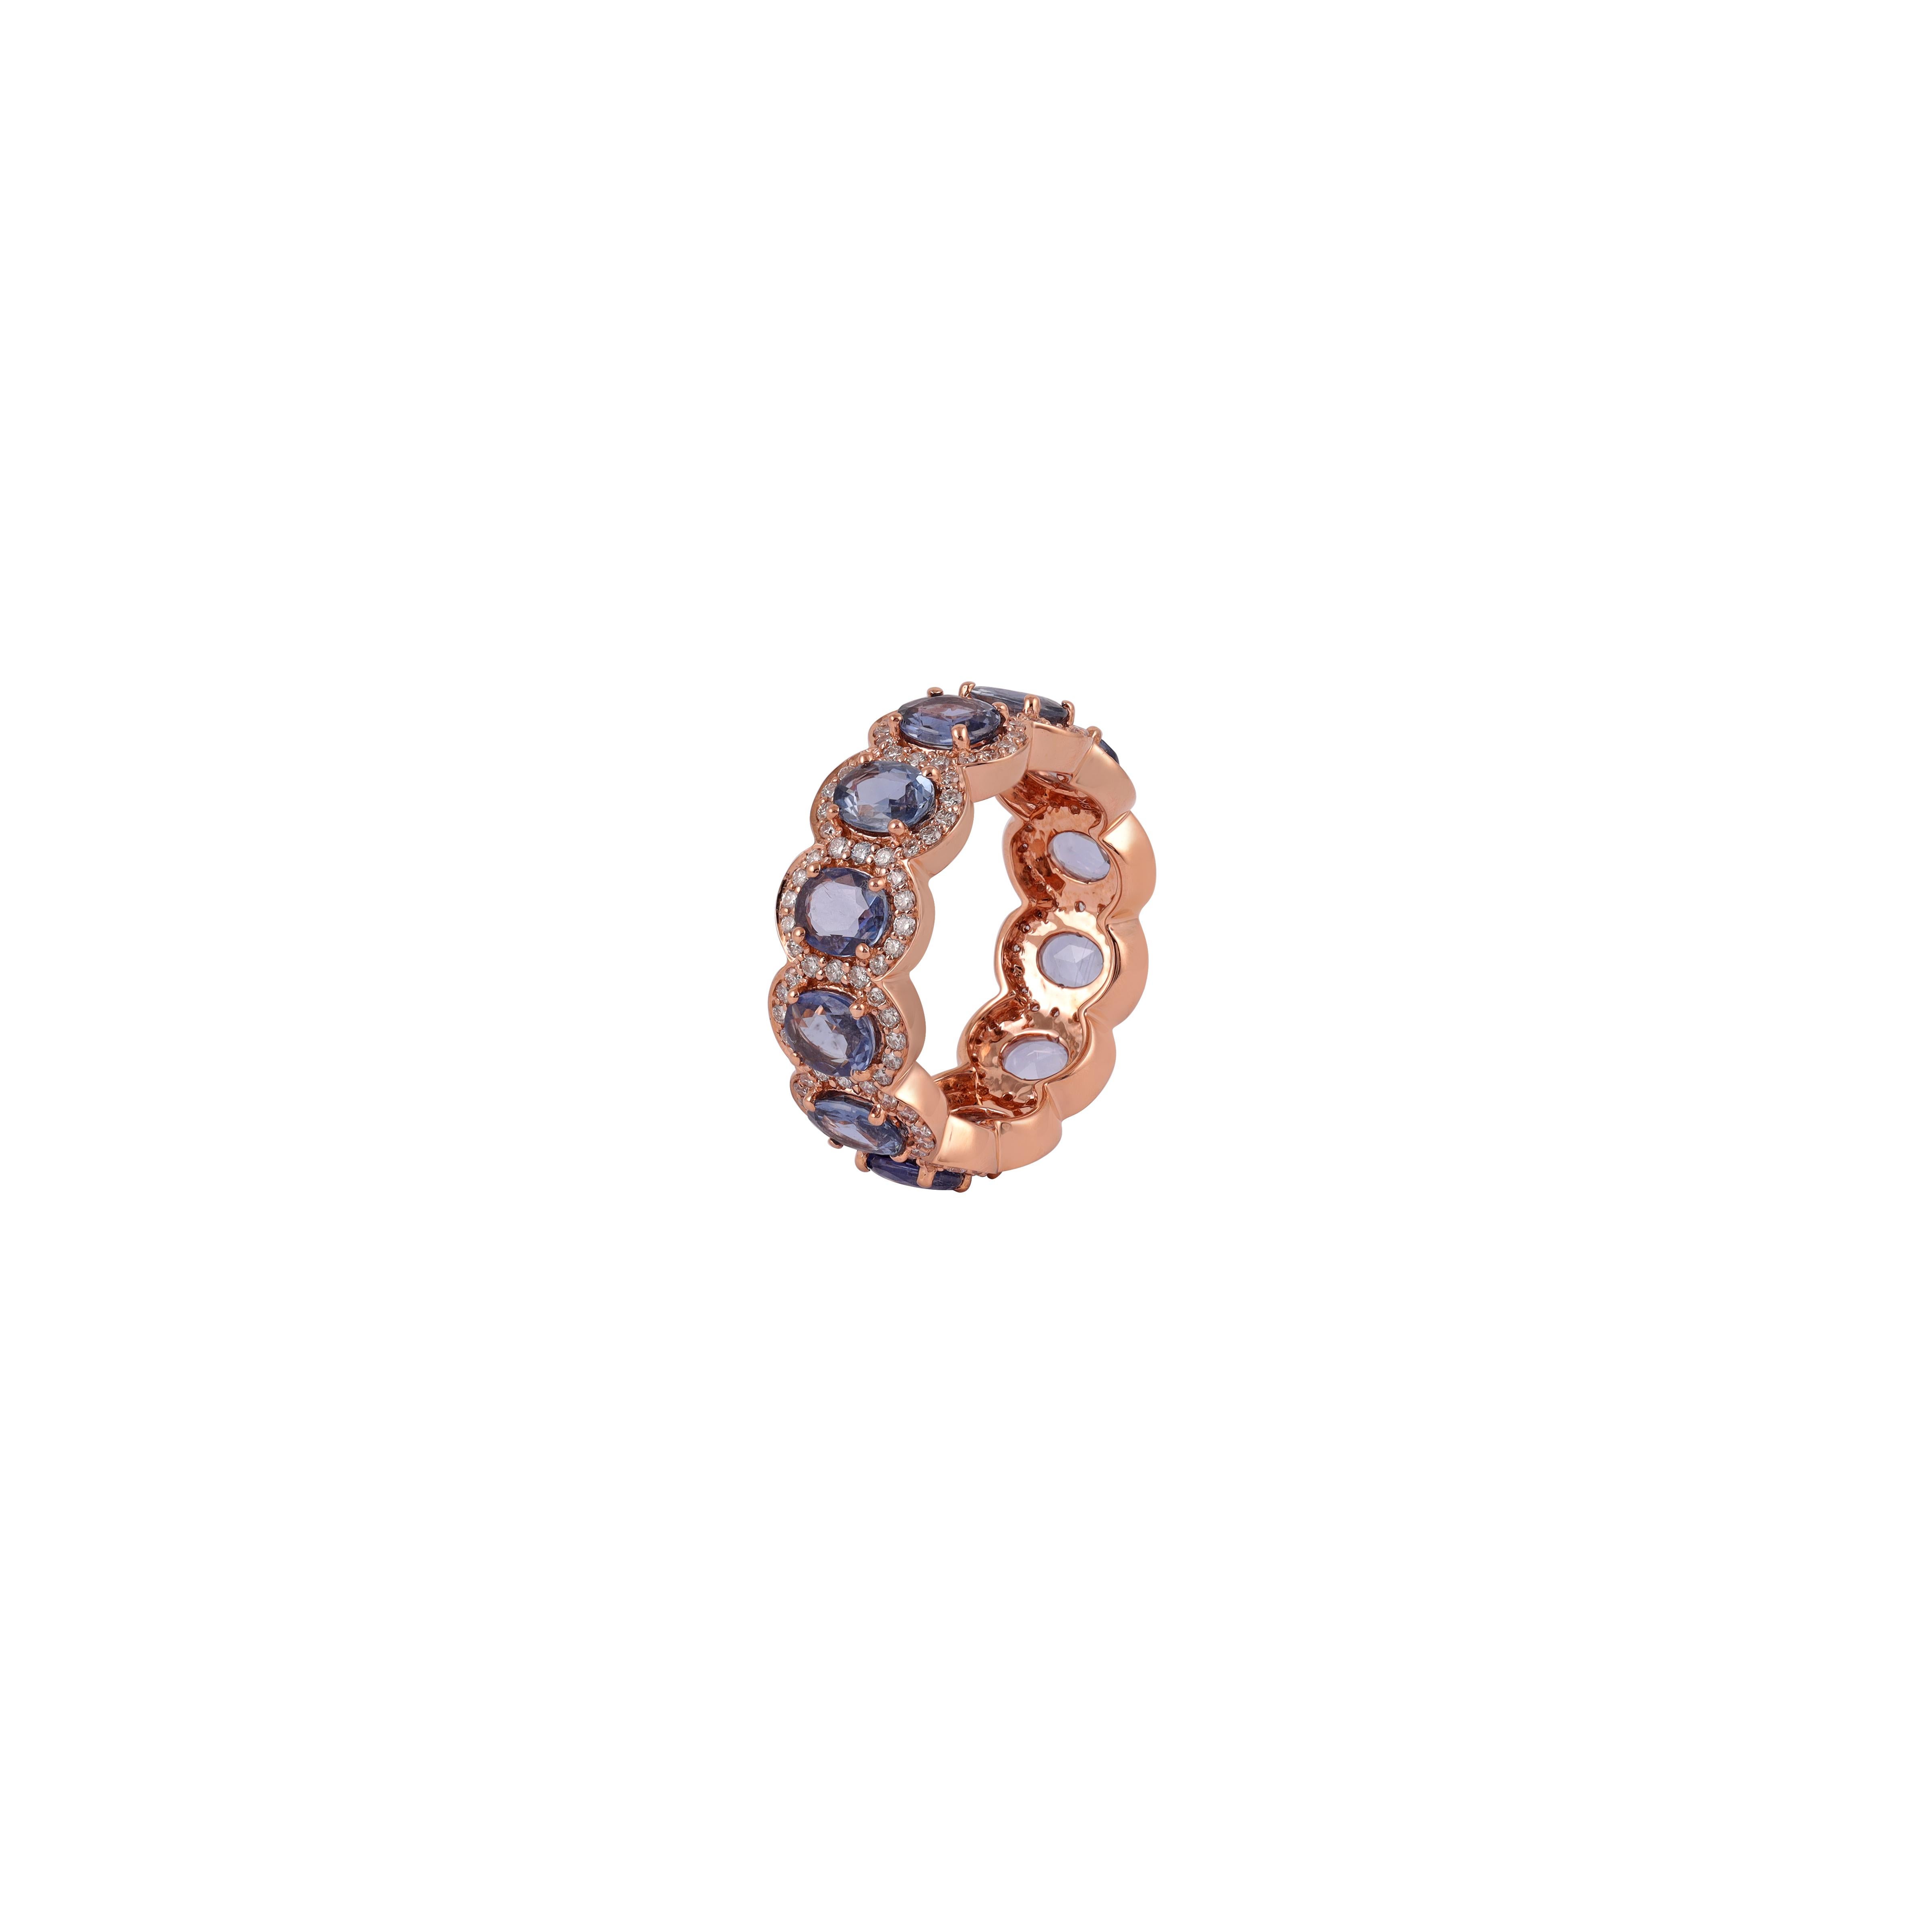 Handcrafted Oval Sapphire Band with brilliant round cut Diamond 
12 Oval Sapphire - 4.70 CTS
4 Oval Pink Sapphire - 1.34 CTS
156 Brilliant round cut Diamond - 0.99 CTS
18 Karat Rose Gold - 6.18 Grams
